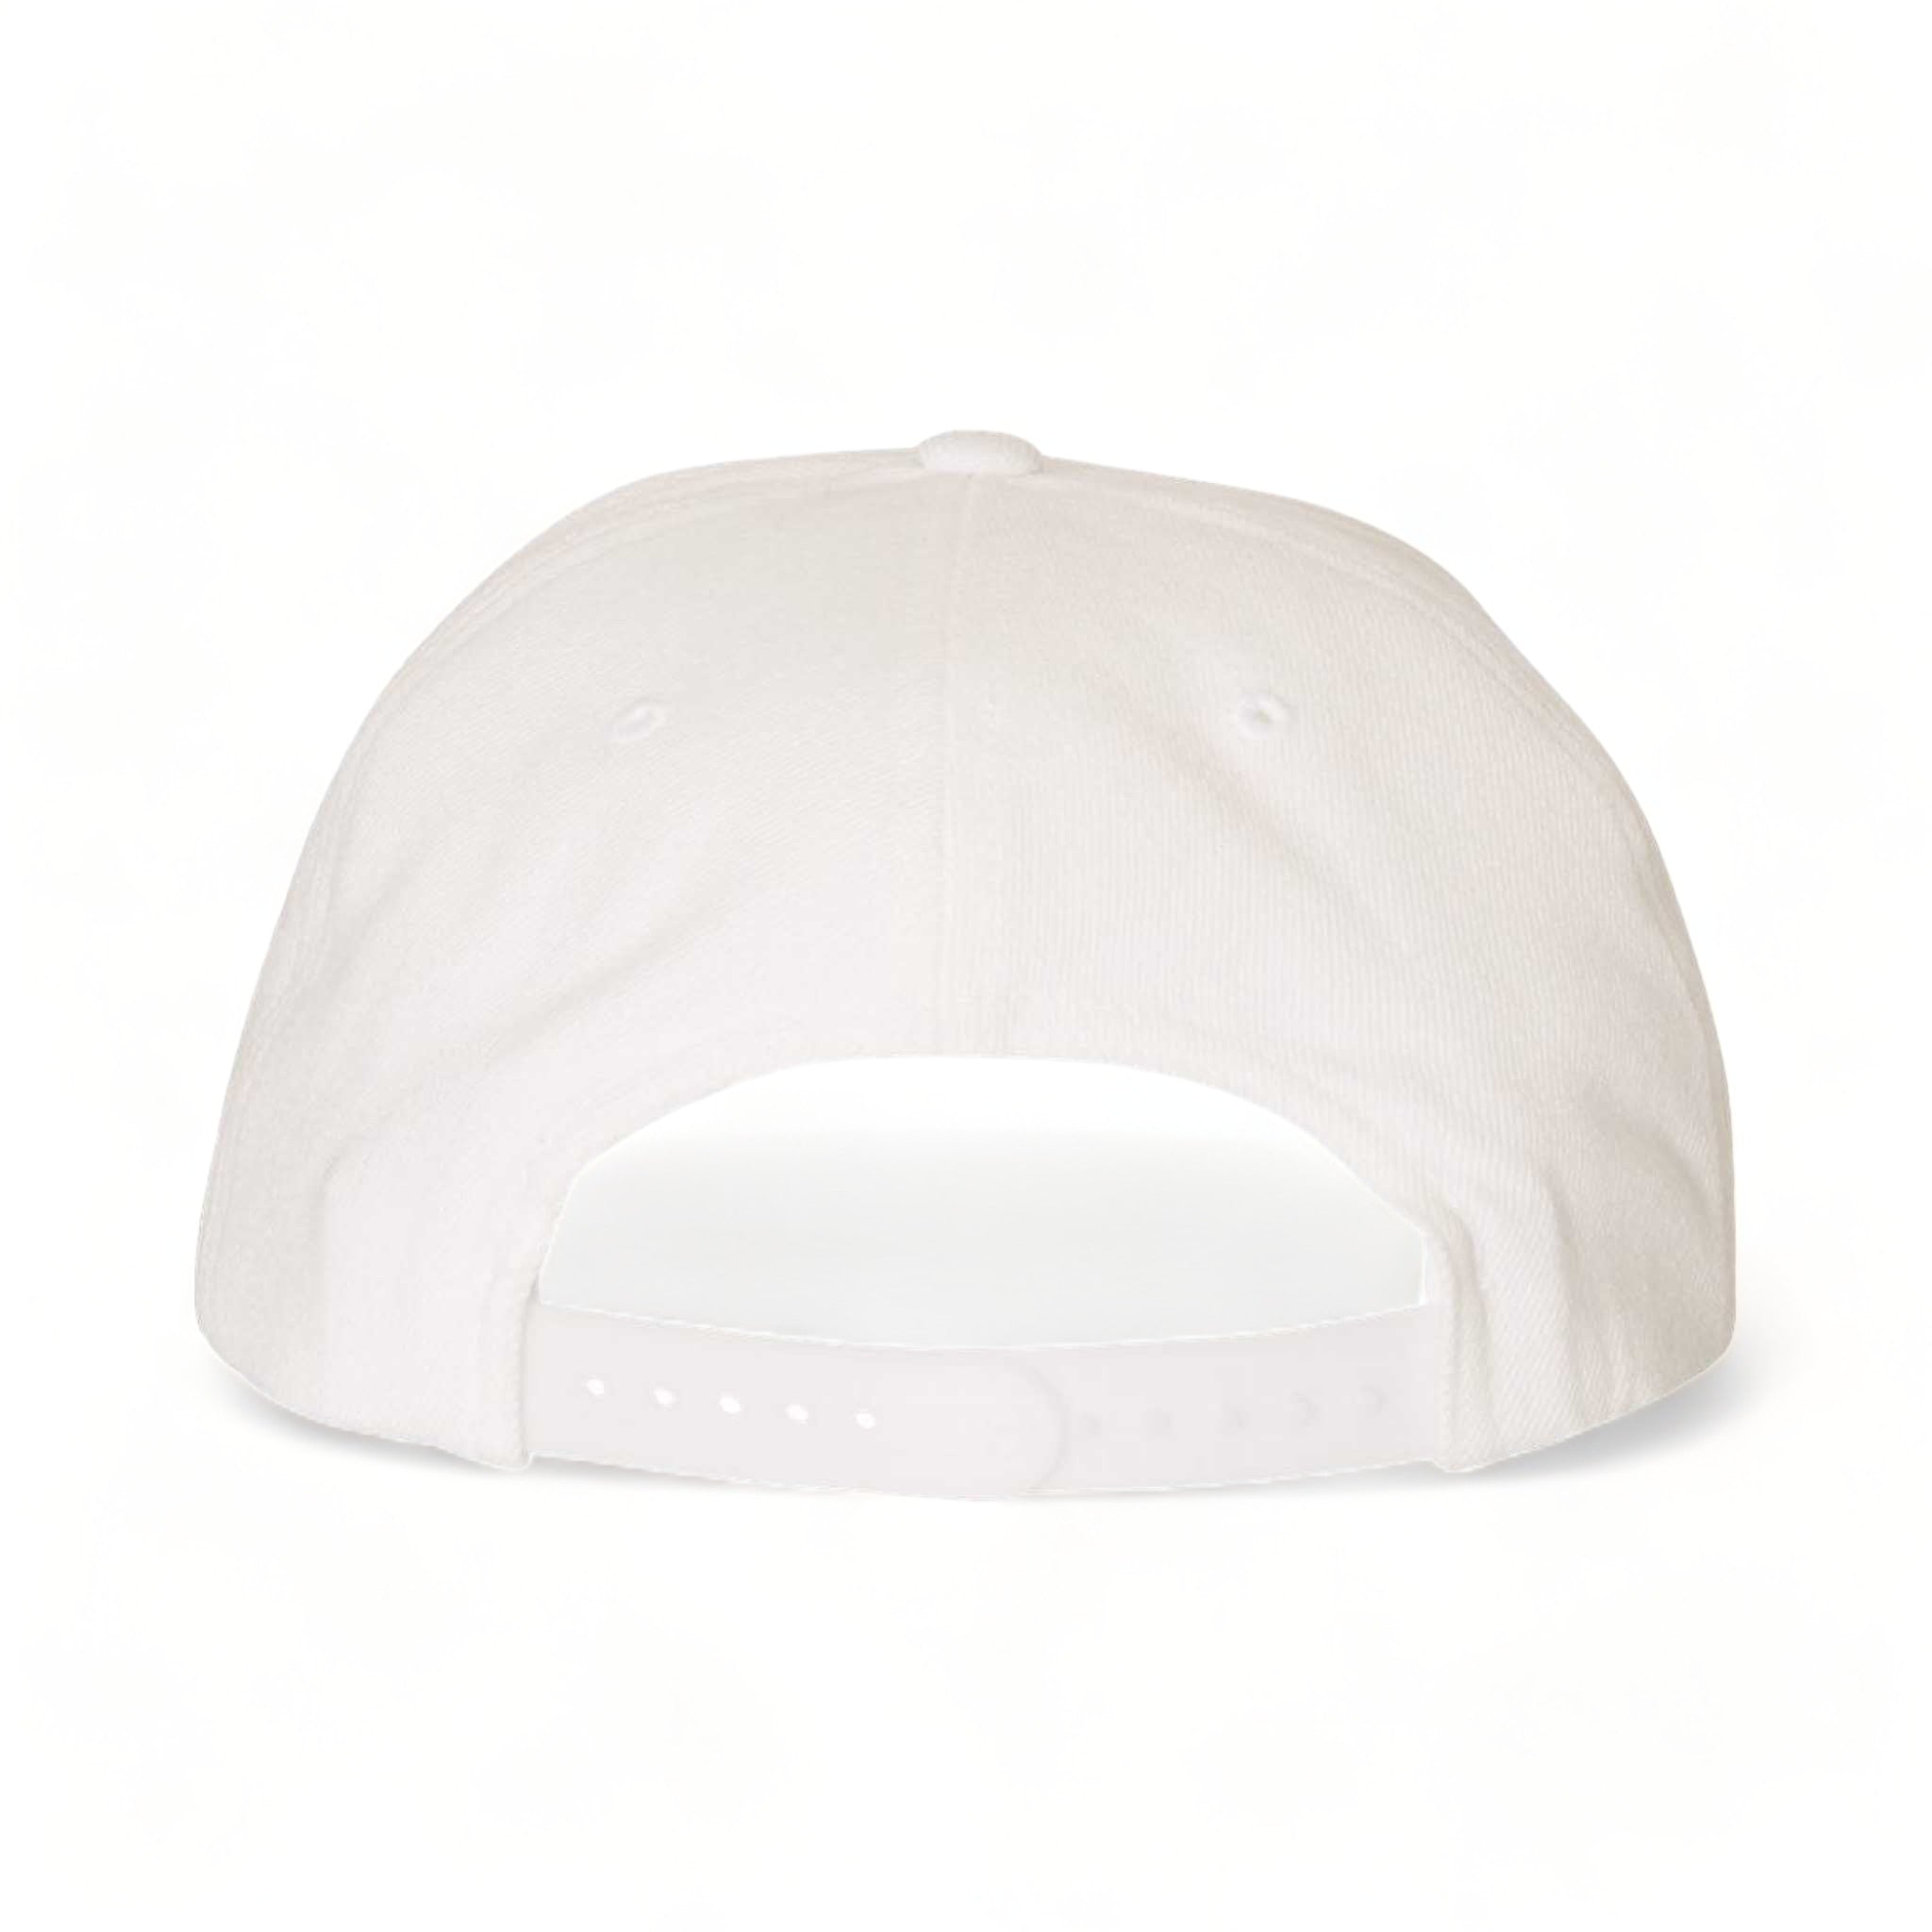 Back view of YP Classics 6089M custom hat in white